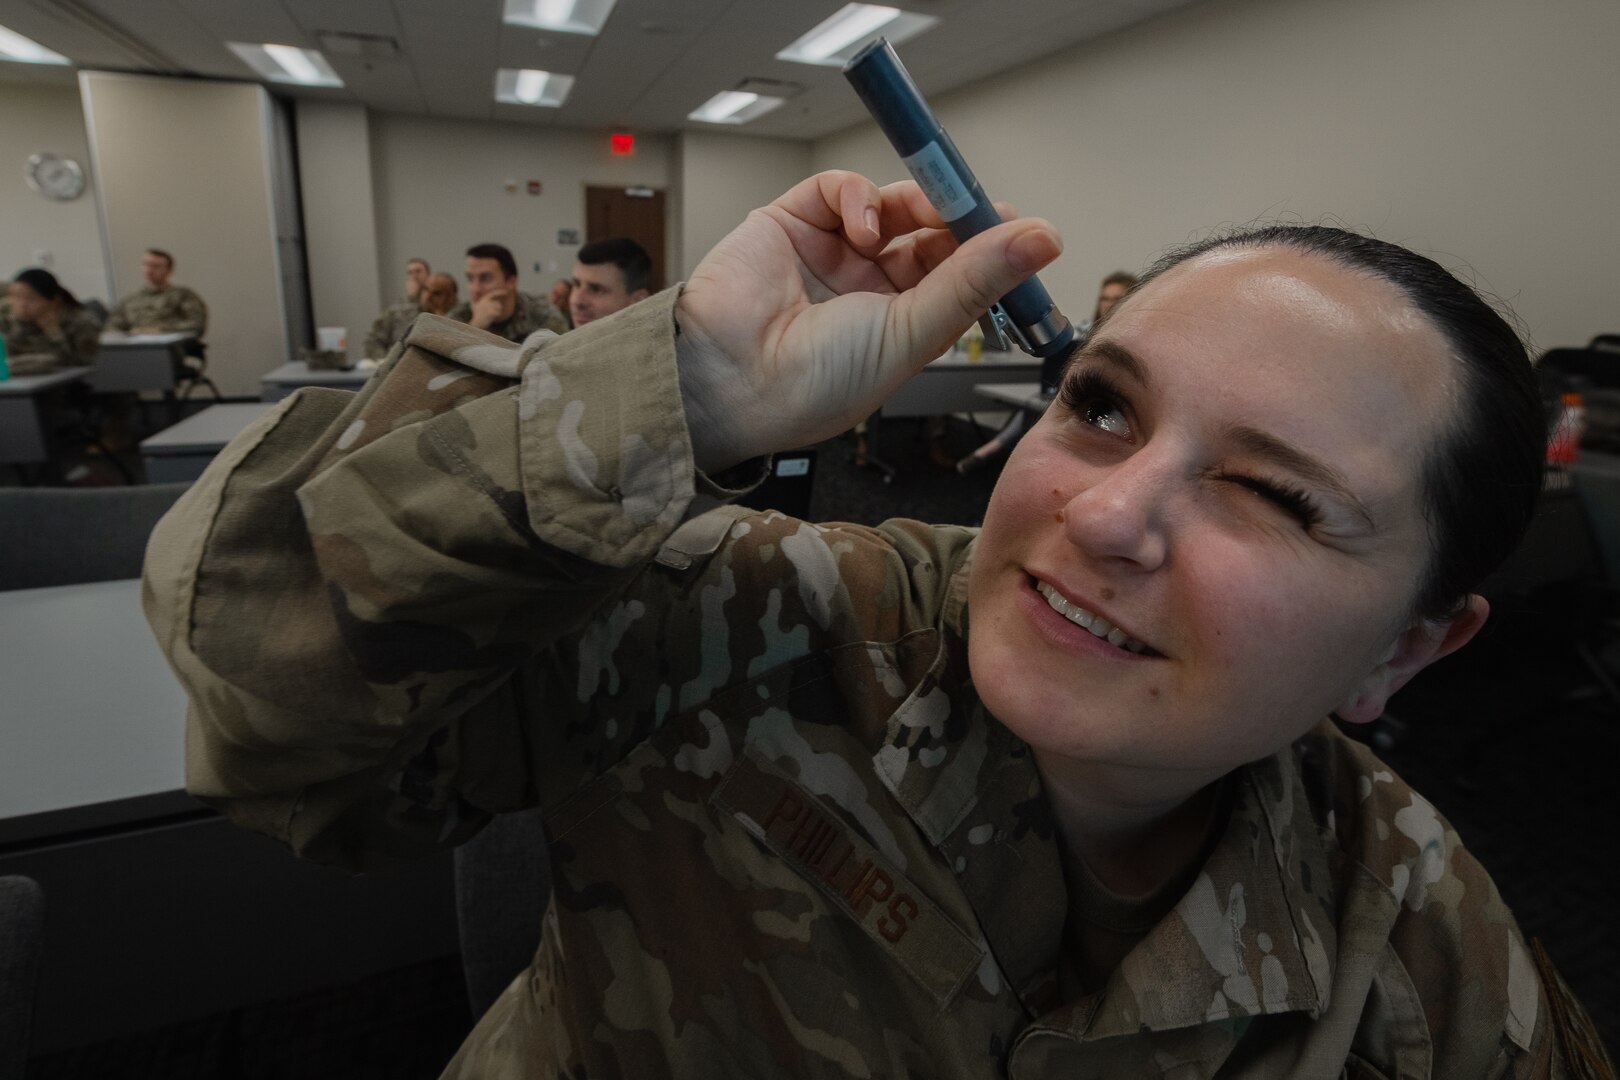 U.S. Air Force Senior Airman Samantha Phillips, 1st Special Operations Medical Readiness Squadron bioenvironmental engineering technician, Hurlburt Field, Florida, inspects a probe device used for radiation detection at MacDill Air Force Base, Florida, Dec. 7, 2022.